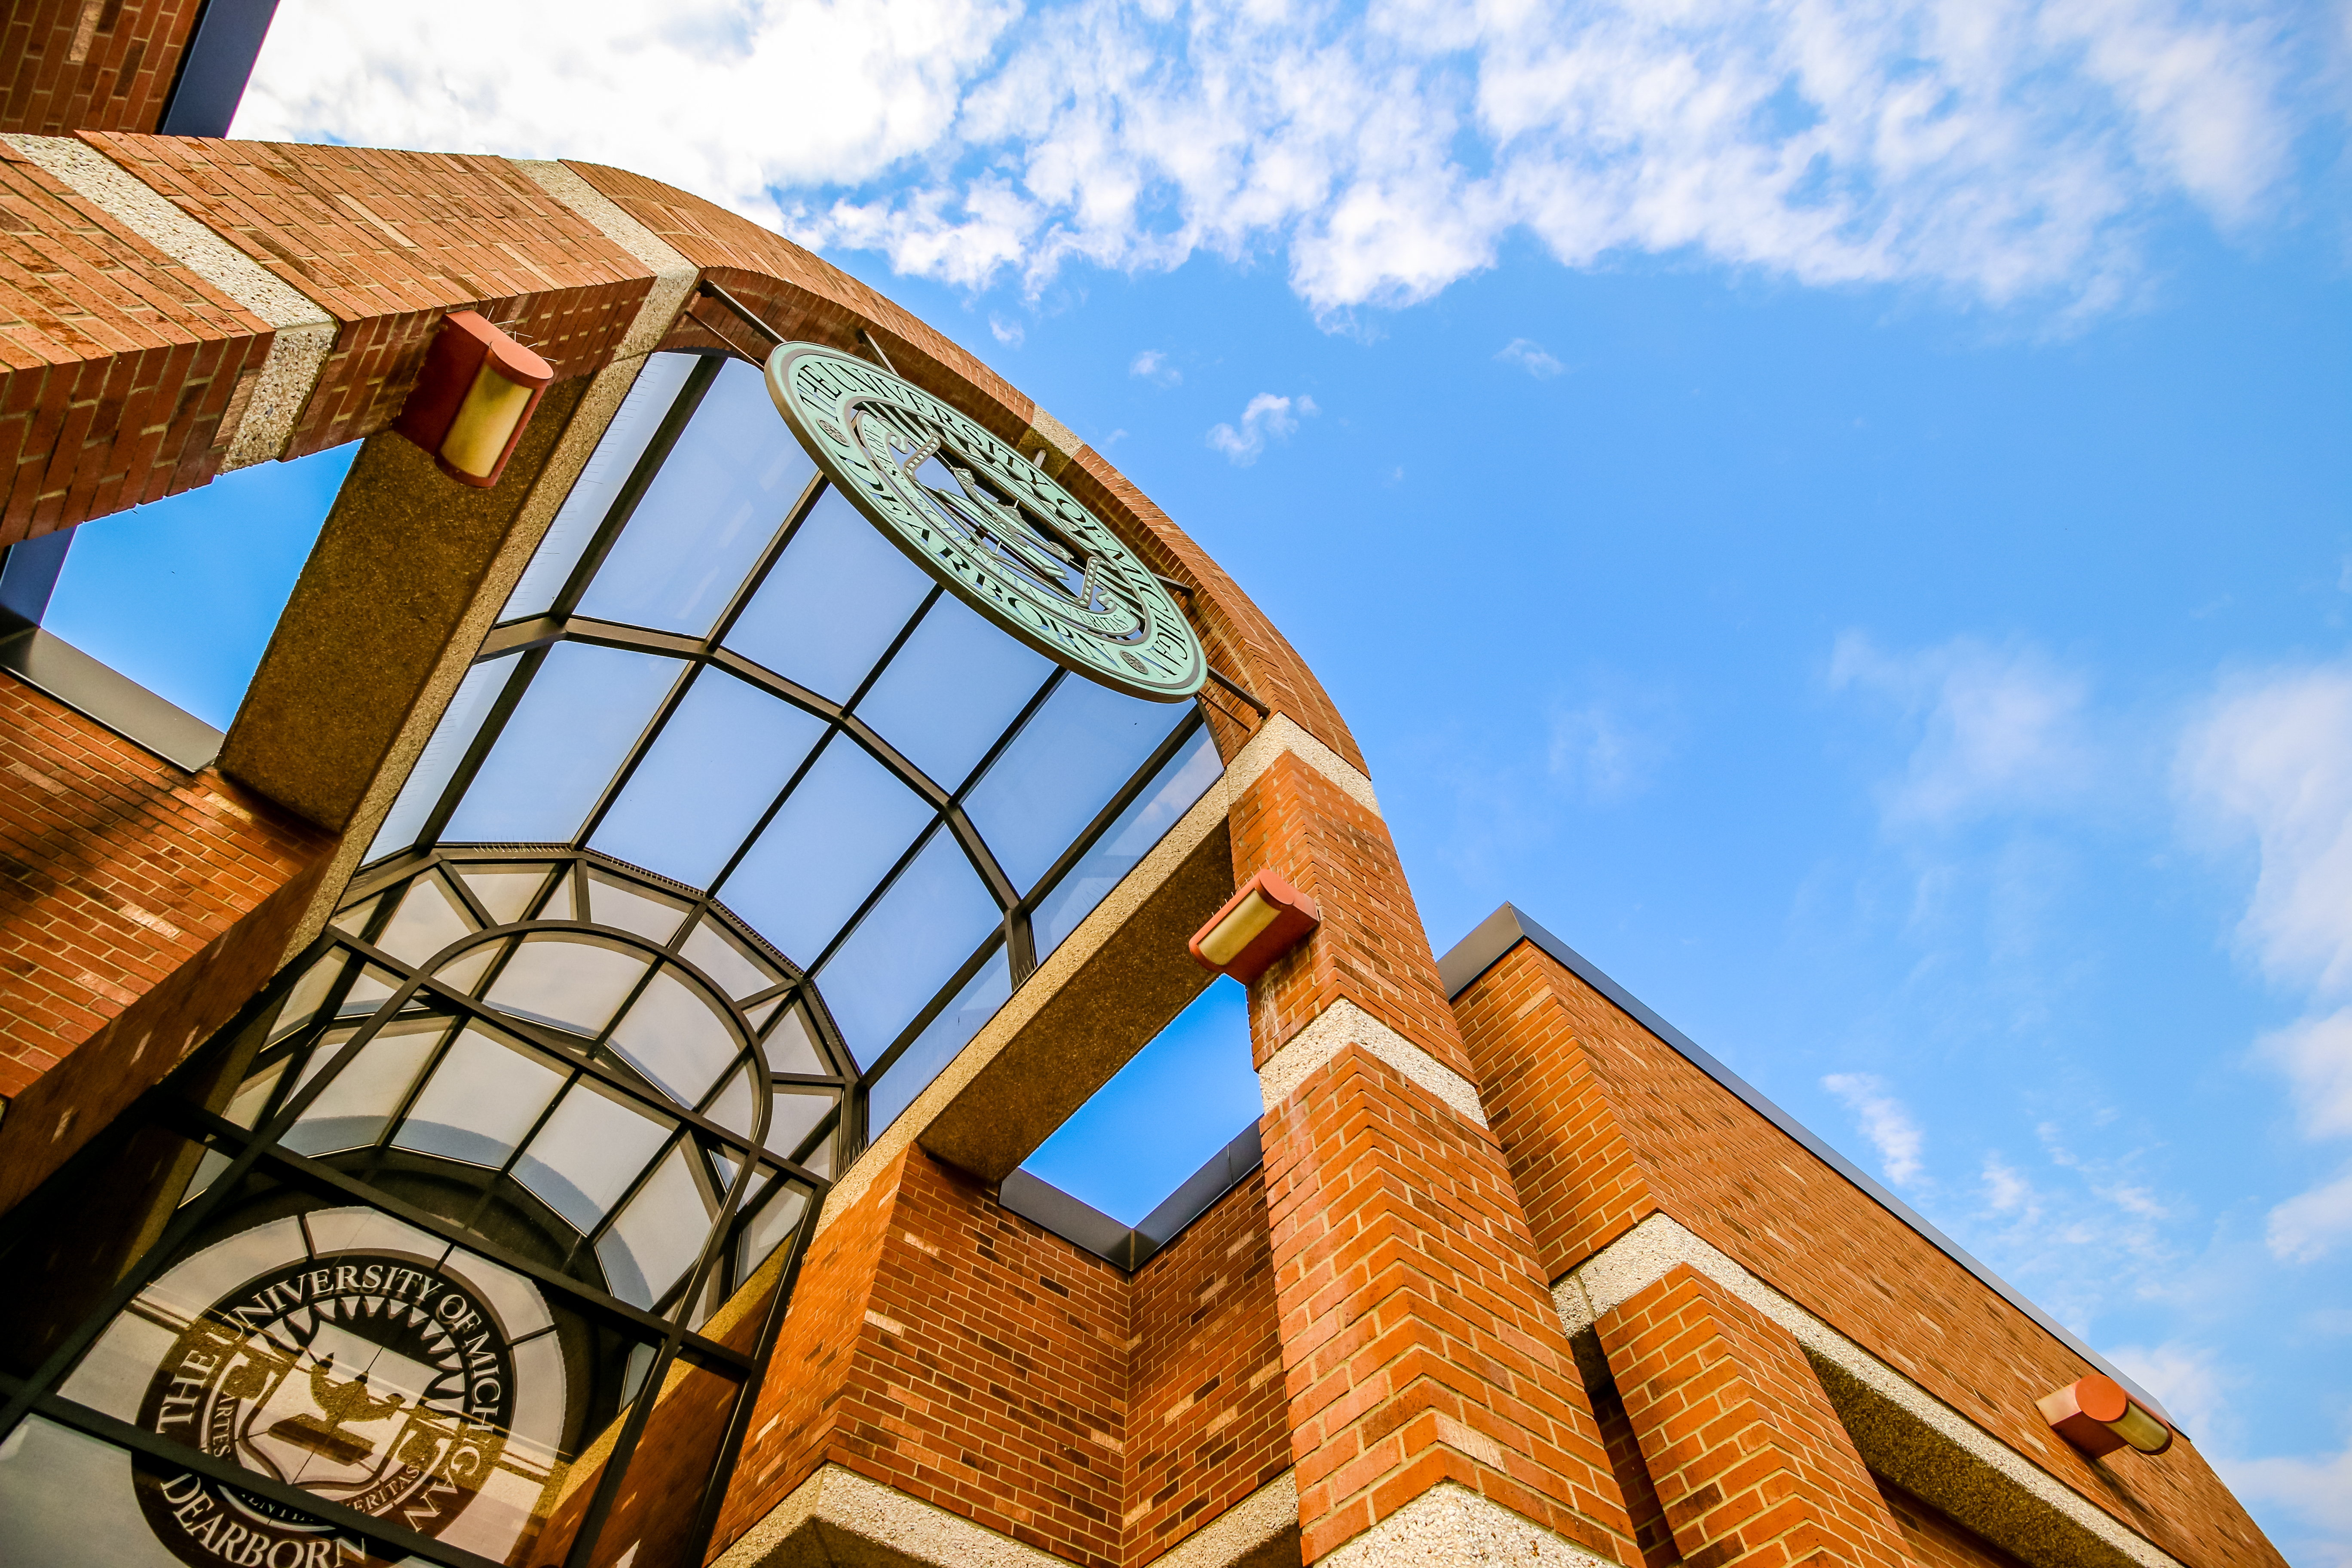 An artistic shot of the university seal on the Social Sciences Building set against a blue sky